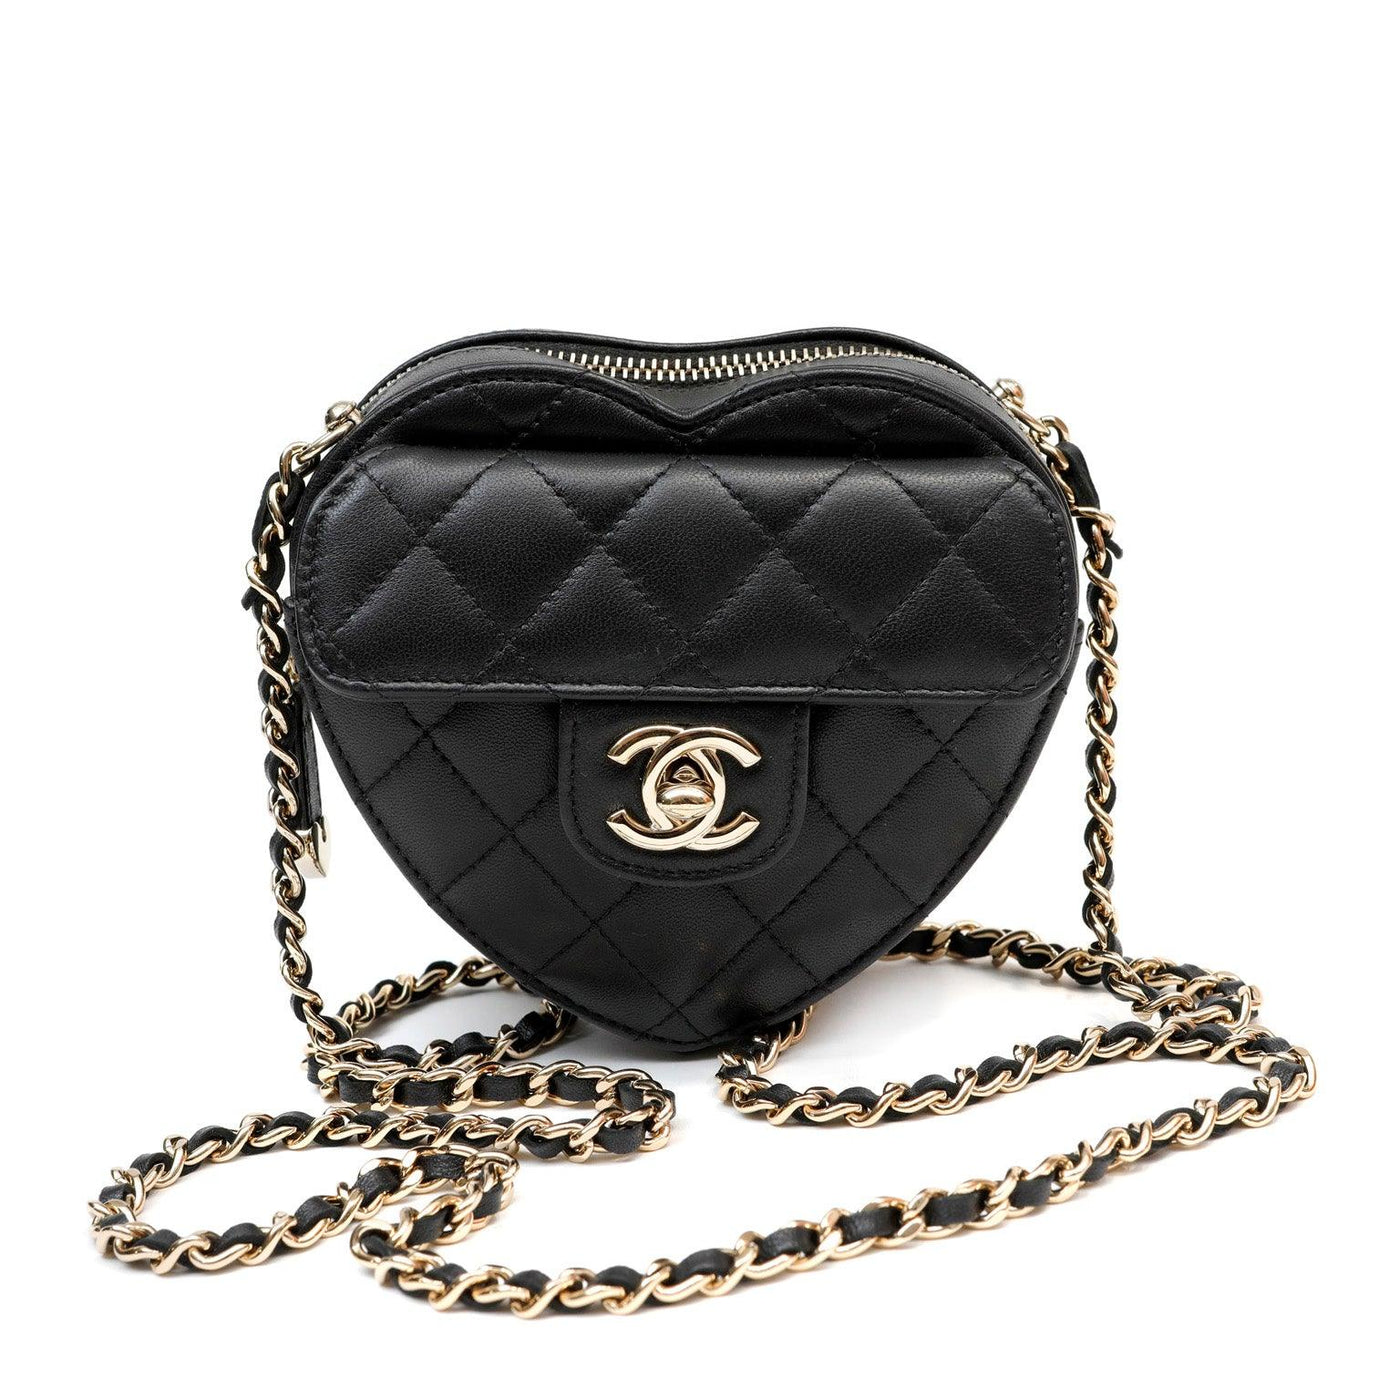 Get your hands on this stunning Chanel Black Lambskin Mini Heart Bag,  perfect for making a bold fashion statement – Only Authentics